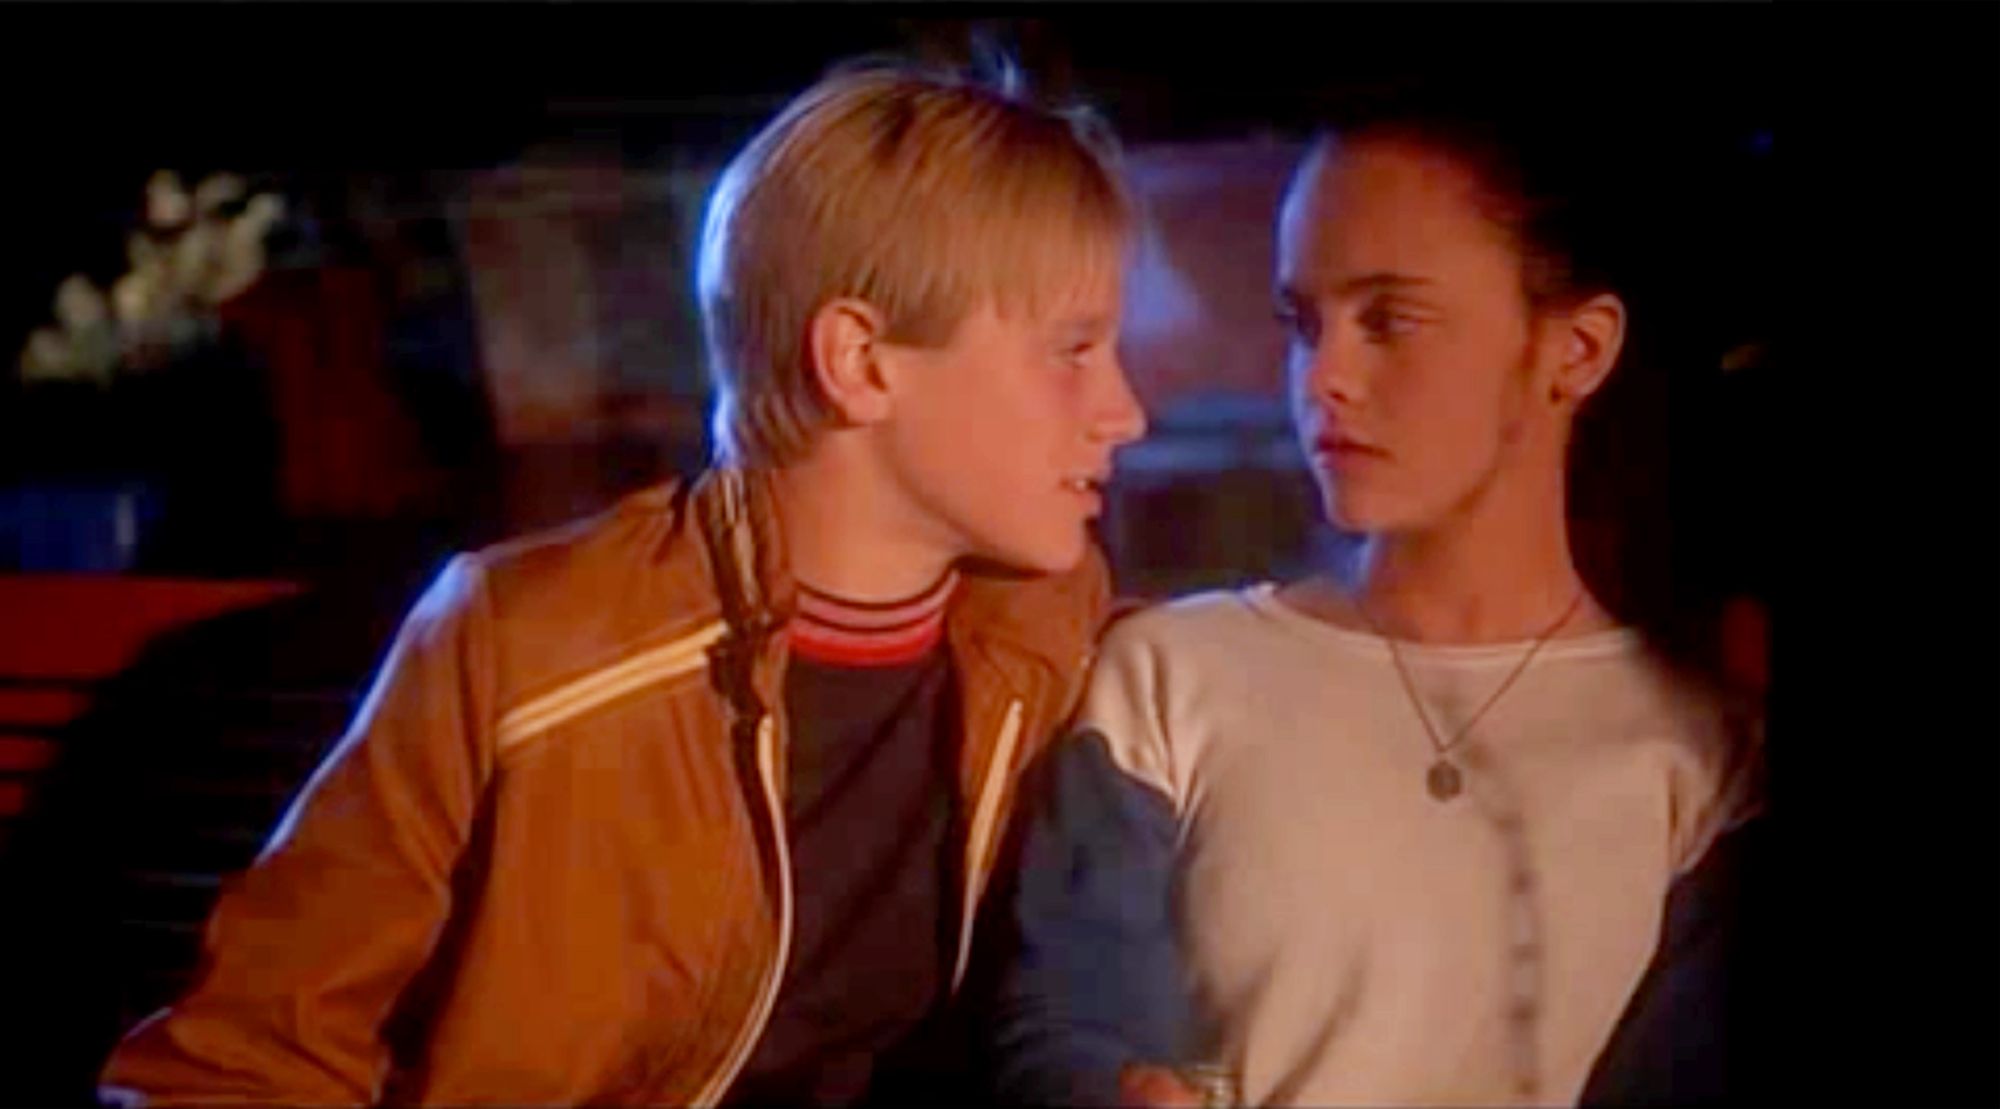 Devon Sawa: 'I Had a Crush on All' of My 'Now and Then' Costars